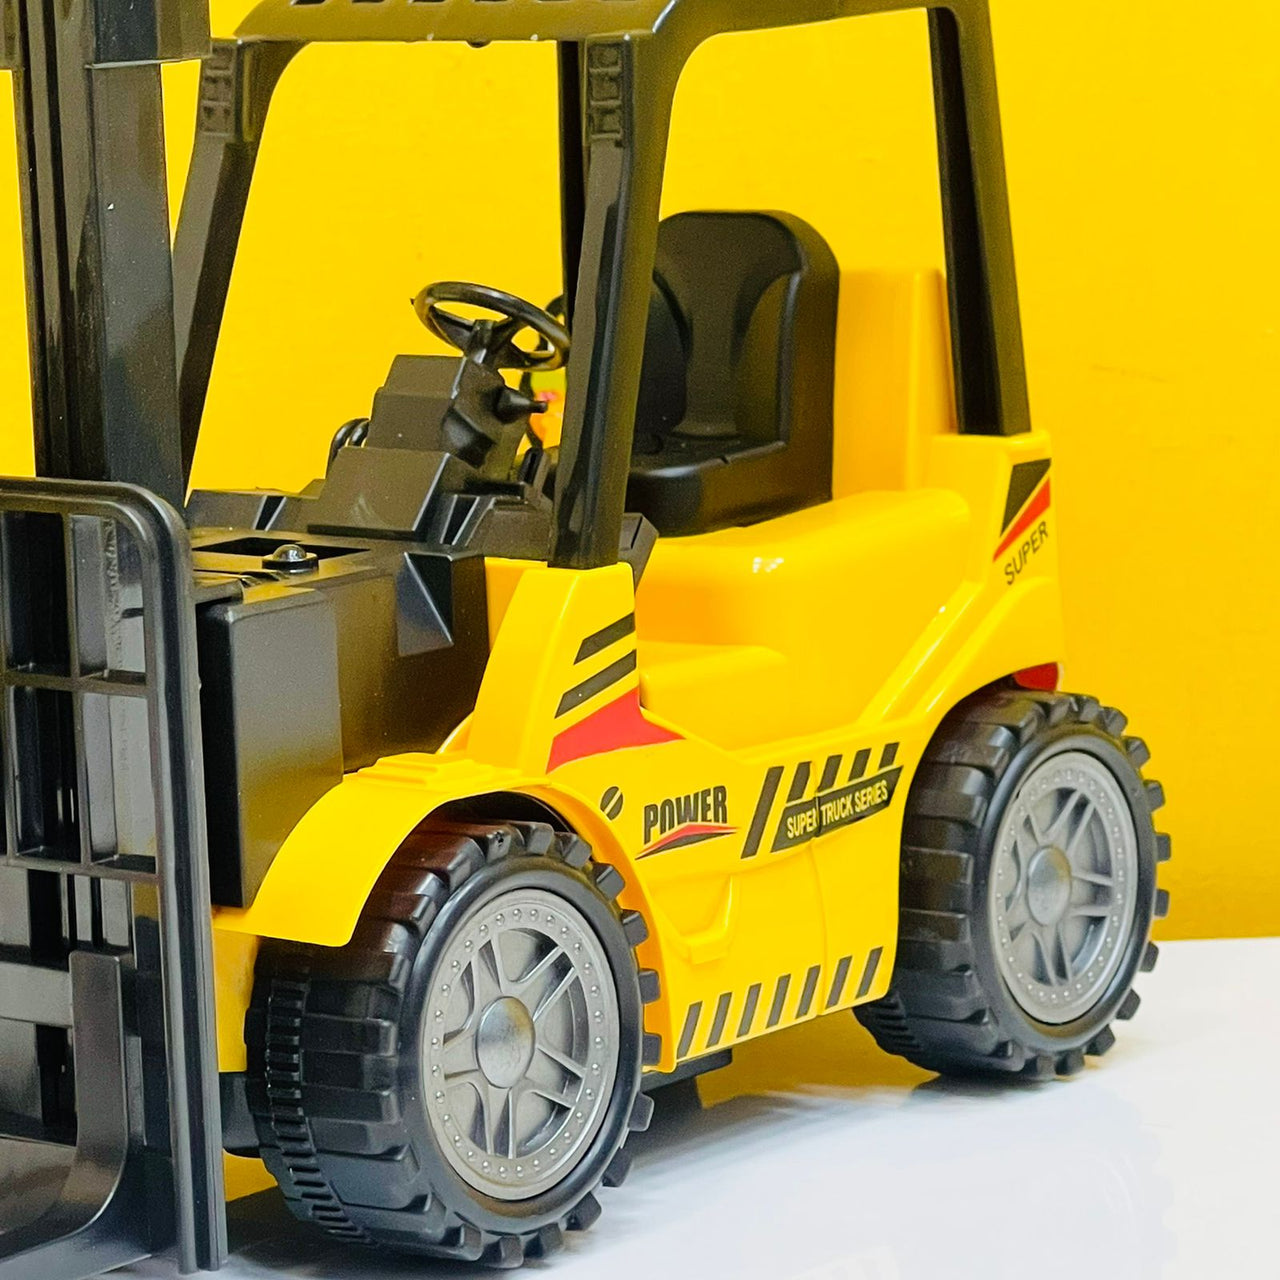 ABS Multi-Function RC Forklift Truck